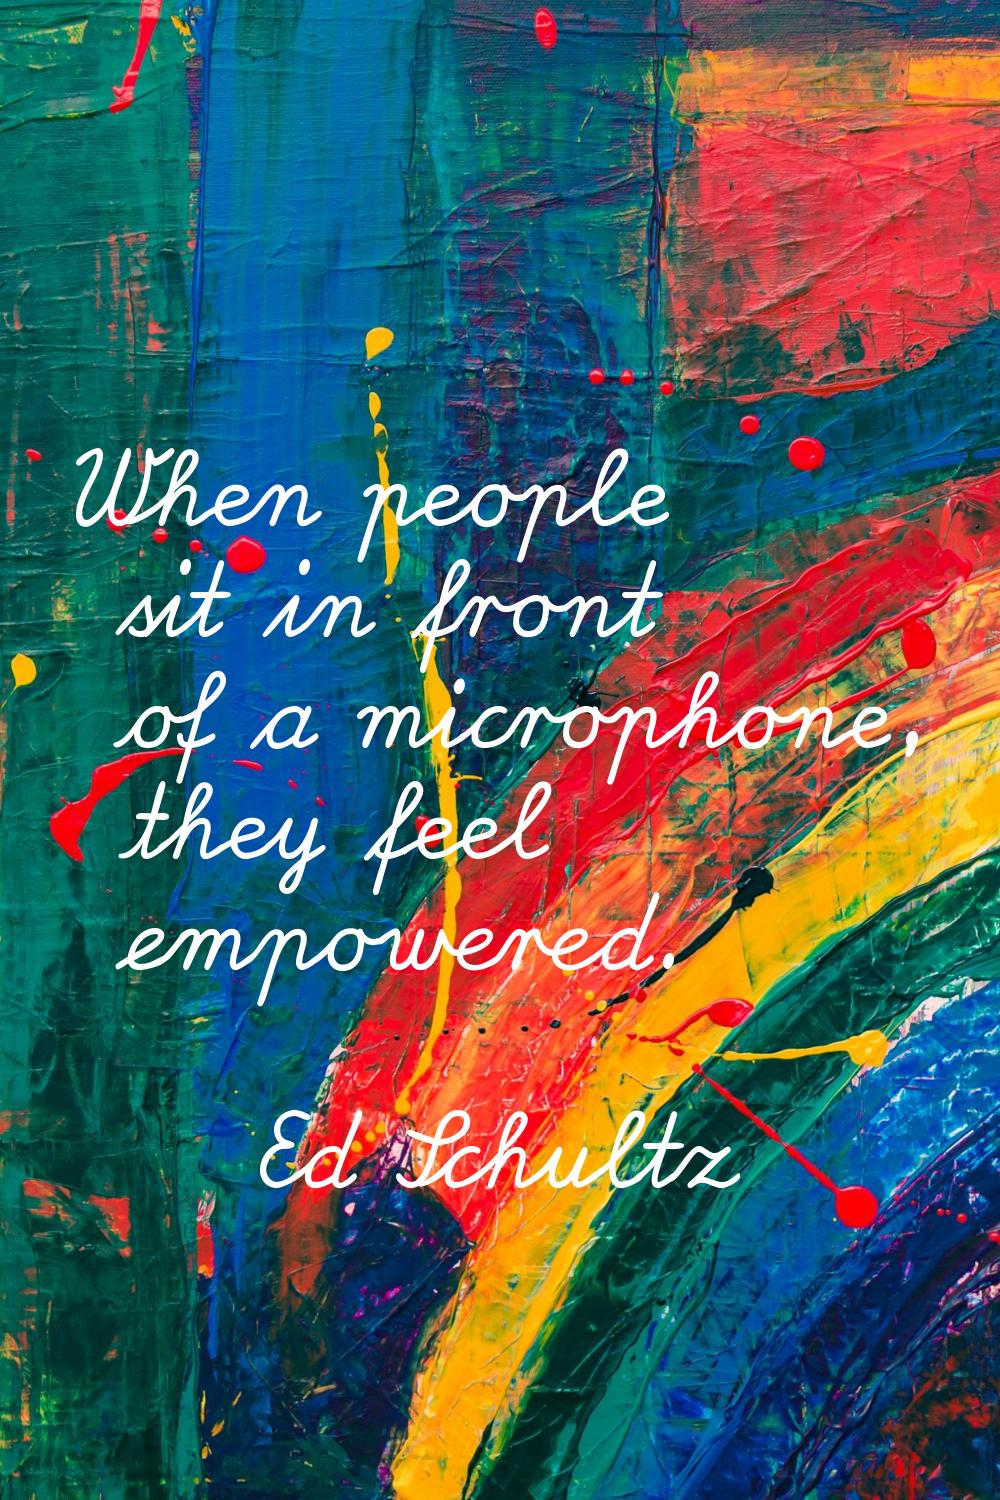 When people sit in front of a microphone, they feel empowered.